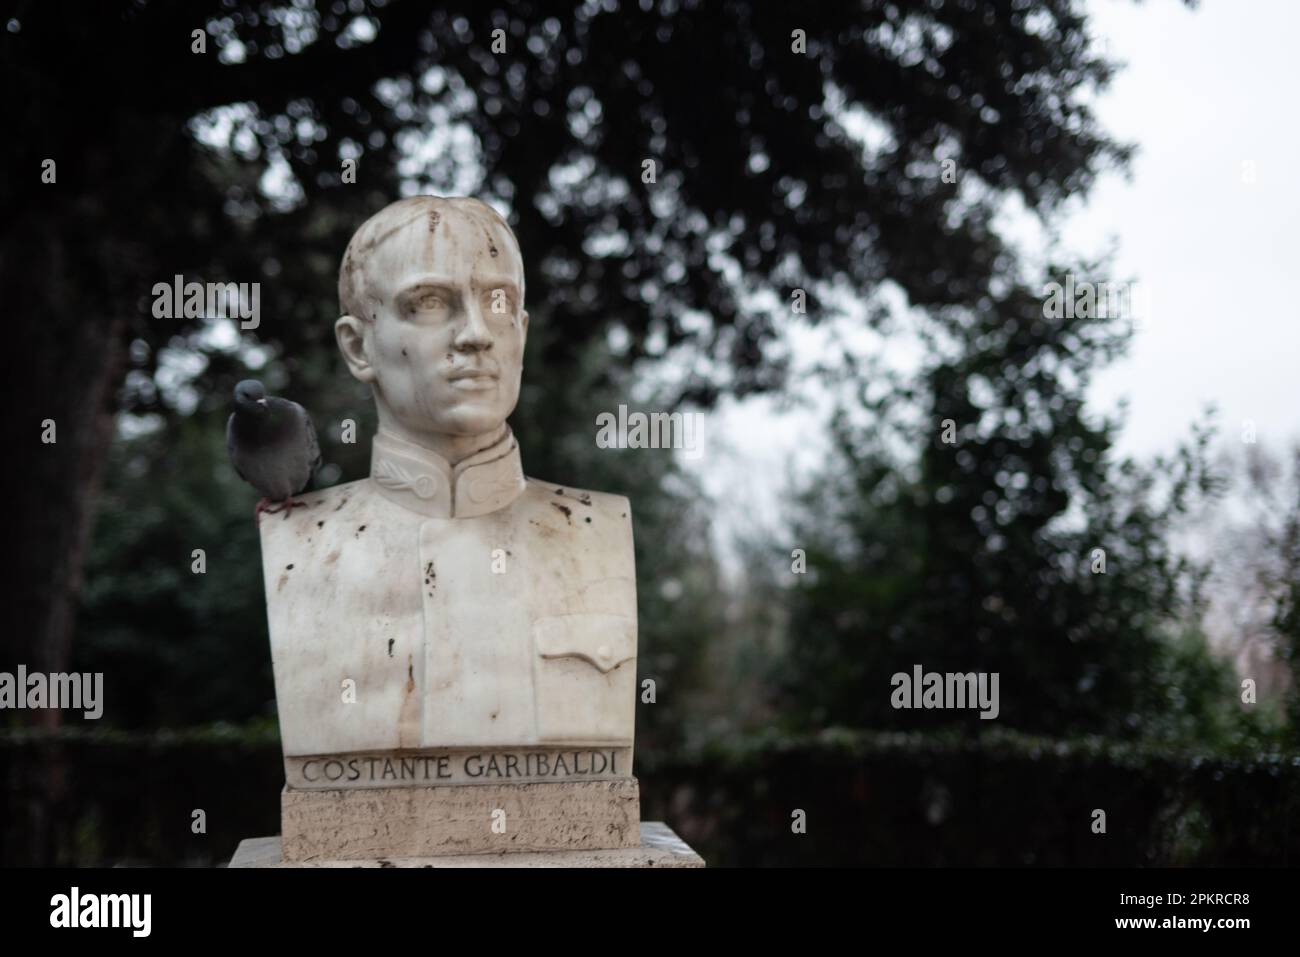 Marble bust of Costante Garibaldi at the Gianicolo Hill Park in Rome, Italy Stock Photo